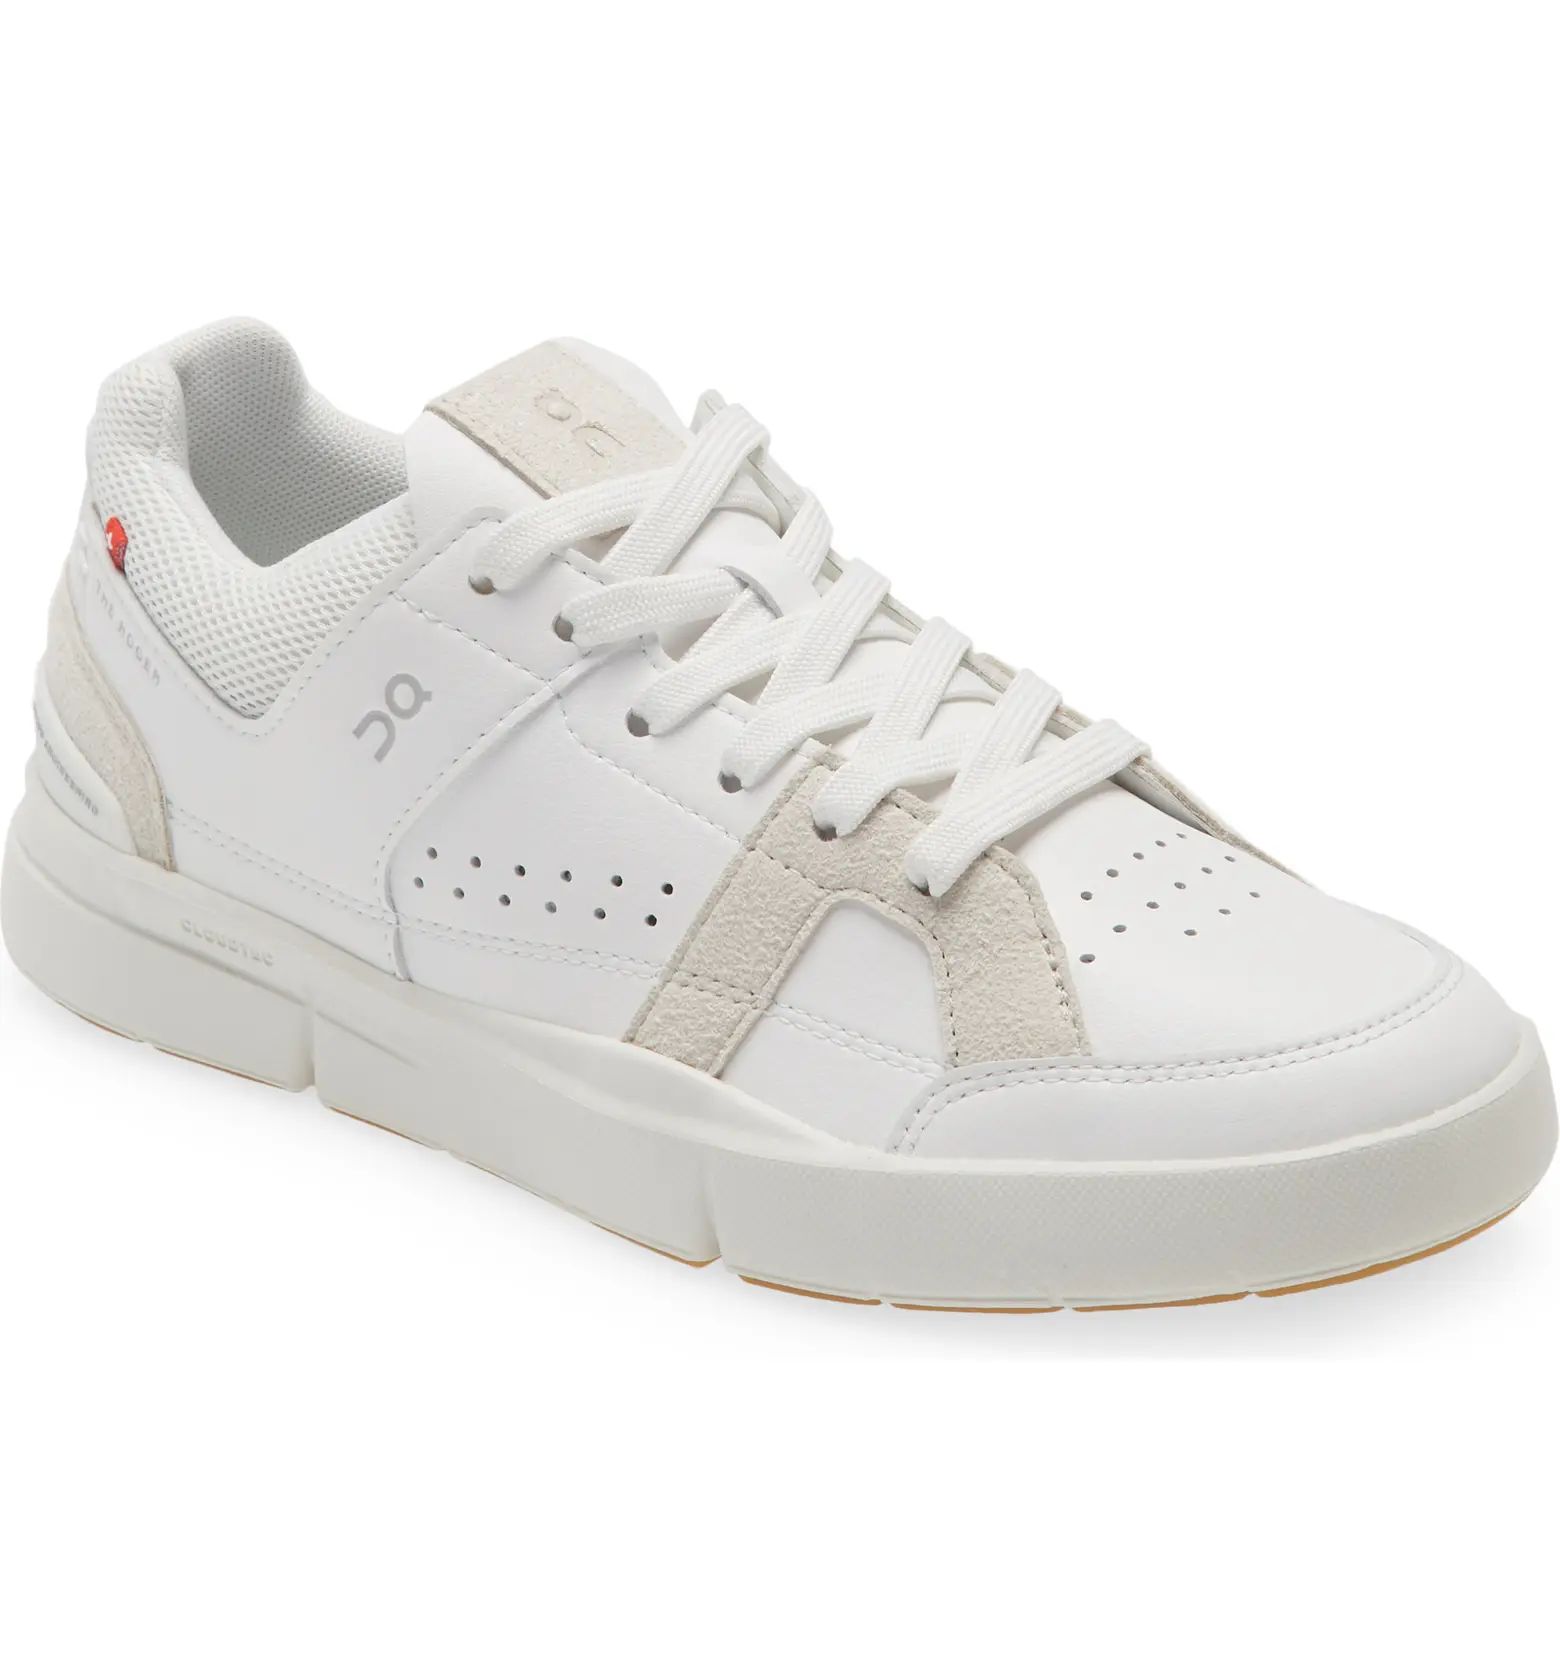 THE ROGER Clubhouse Tennis Sneaker - Women | Nordstrom